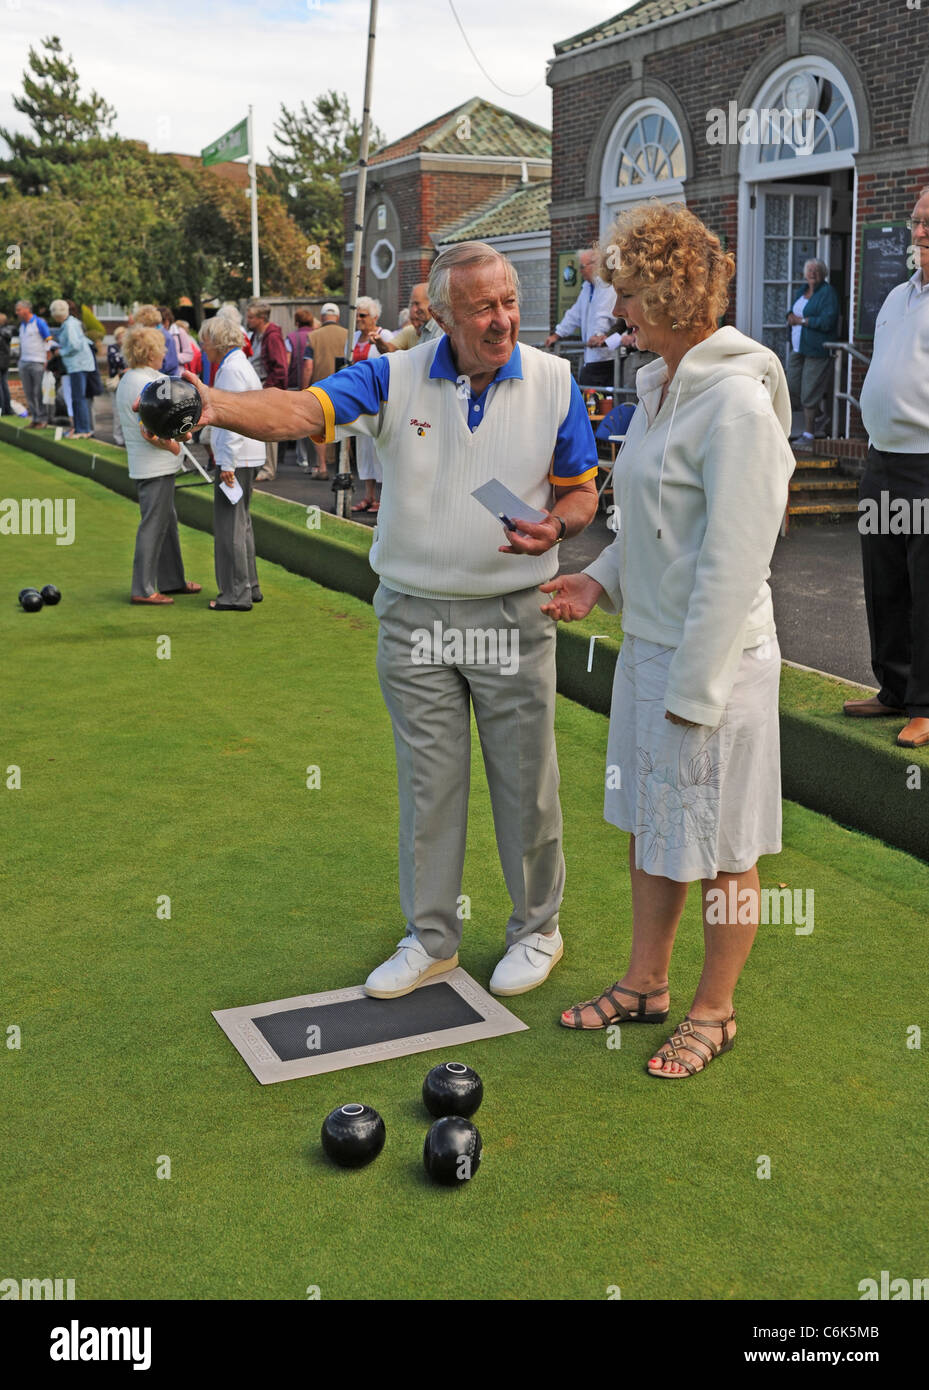 Expert bowlers giving instruction to newcomers at the Worthing Marine Gardens Bowls Club in Worthing West Sussex UK Stock Photo